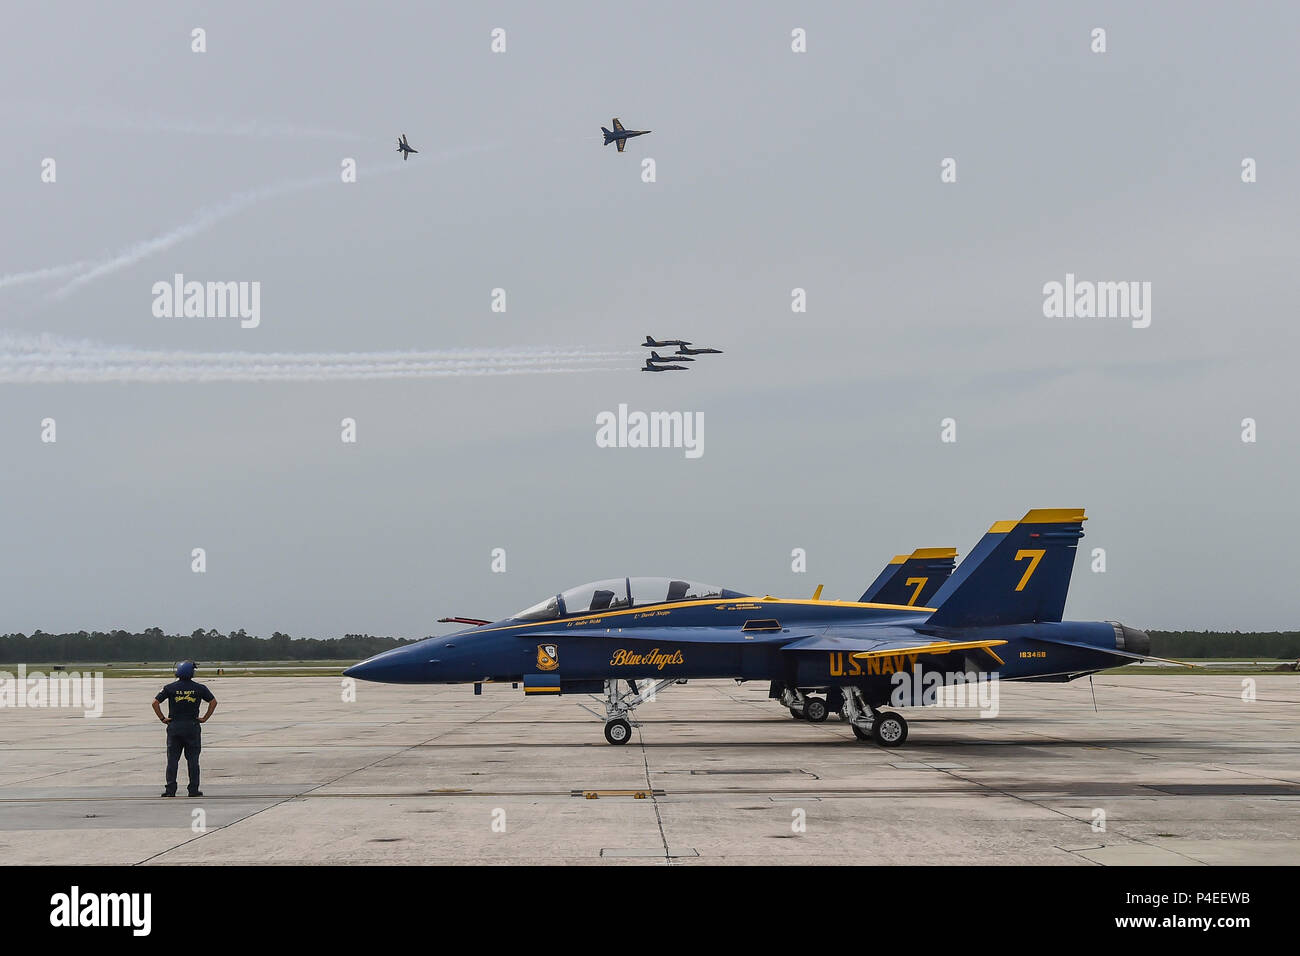 180618-N-UK306-1030 Pensacola, Florida (June 18, 2018)— The U.S. Navy flight demonstration squadron, the Blue Angels, perform the Pitch Up Break upon returning home to Pensacola. The Blue Angels are scheduled to perform more than 60 demonstrations at more than 30 locations across the U.S. and Canada in 2018. The Blue Angels are scheduled to perform more than 60 demonstrations at more than 30 locations across the U.S. and Canada in 2018. (U.S. Navy photo by Mass Communication Specialist 2nd Class Timothy Schumaker/Released) Stock Photo